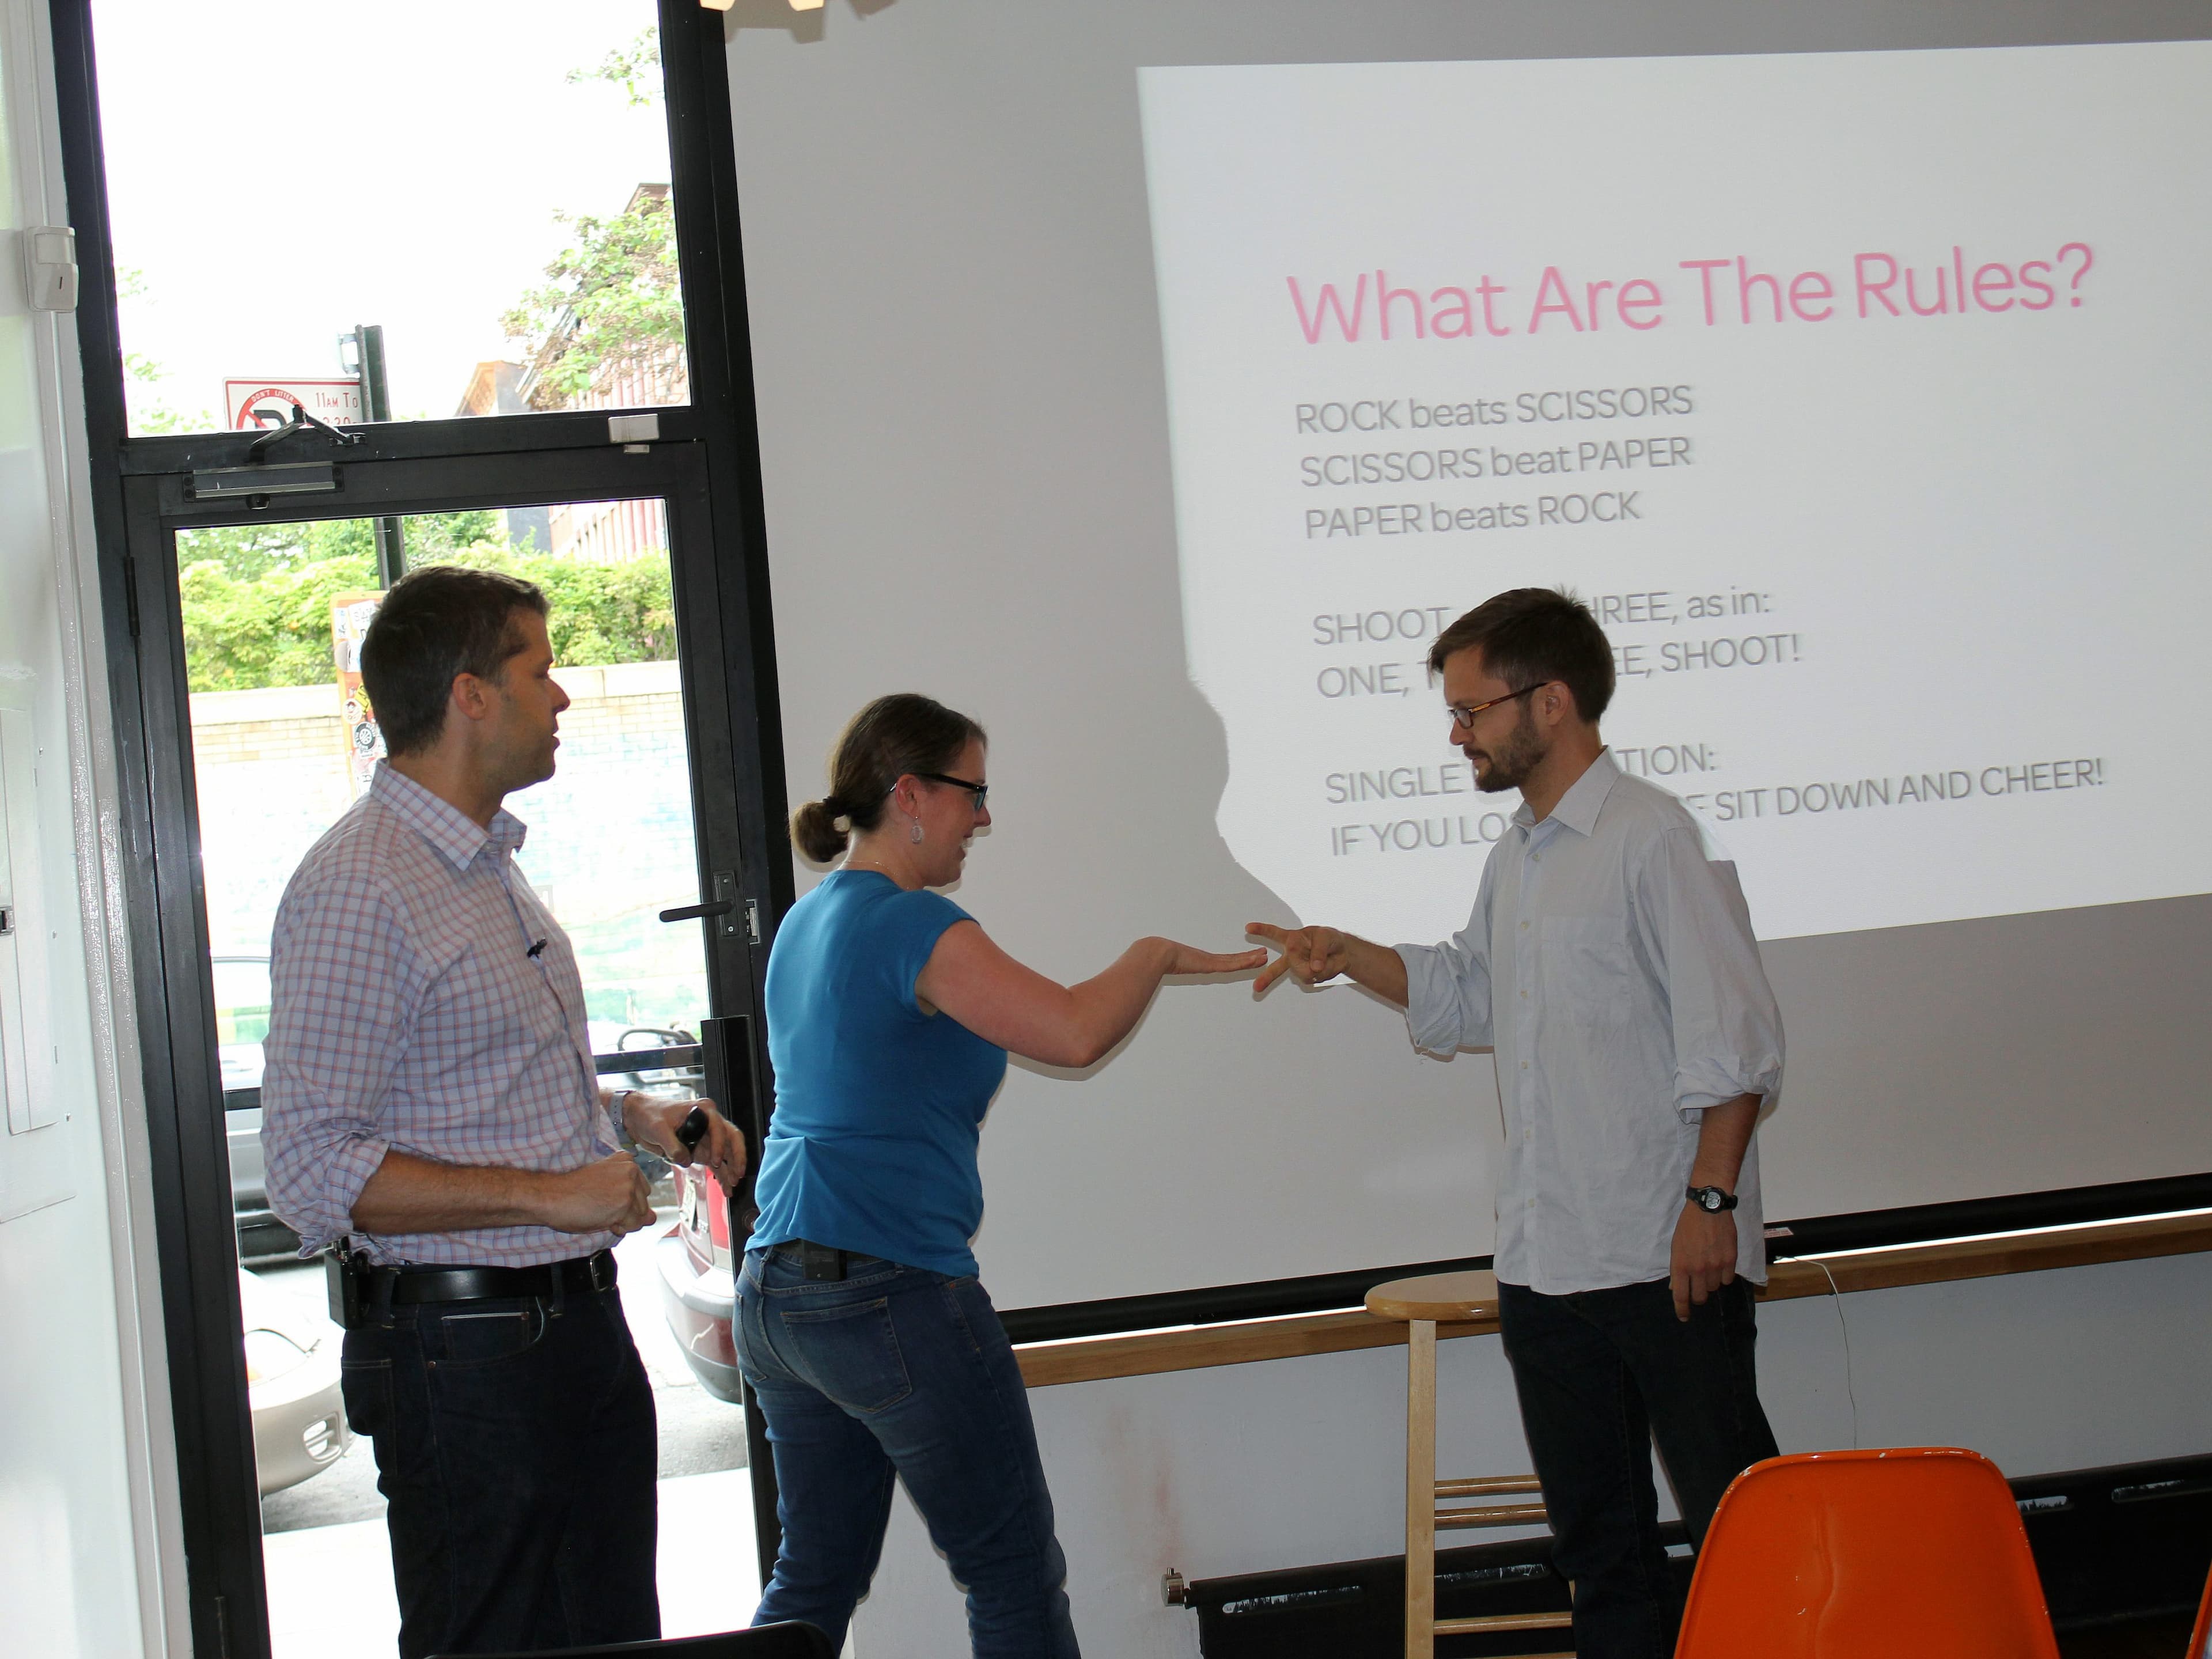 Three people are playing Rock-Paper-Scissors inside a room. A woman in a blue shirt and a man in a white shirt are making hand gestures, while another man in a checked shirt watches. Behind them, a screen displays the rules of the game.